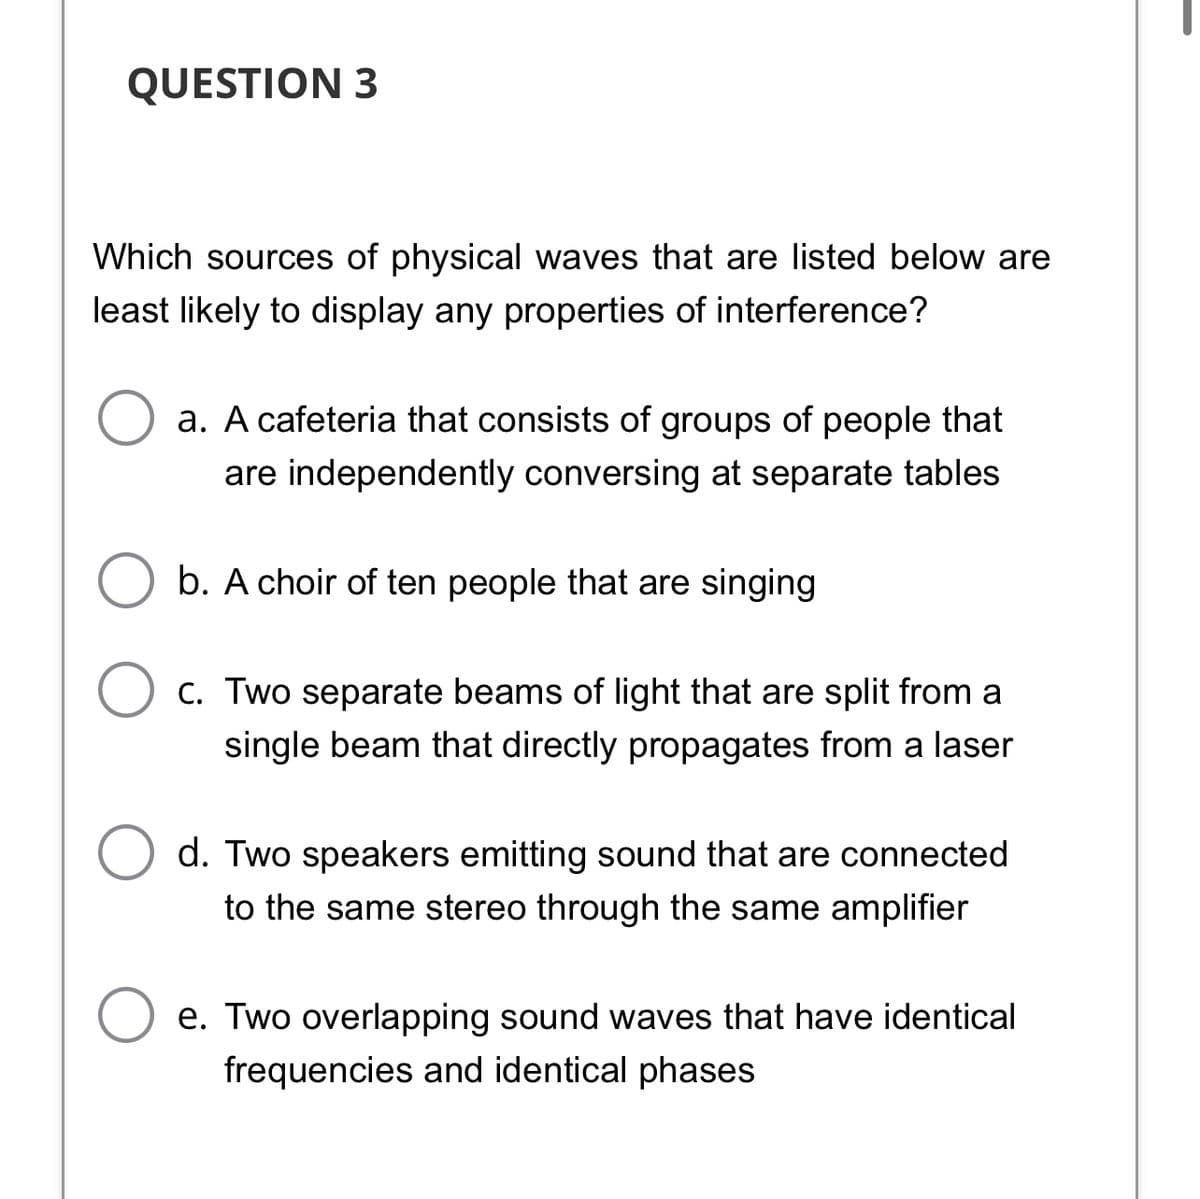 QUESTION 3
Which sources of physical waves that are listed below are
least likely to display any properties of interference?
a. A cafeteria that consists of groups of people that
are independently conversing at separate tables
b. A choir of ten people that are singing
C. Two separate beams of light that are split from a
single beam that directly propagates from a laser
d. Two speakers emitting sound that are connected
to the same stereo through the same amplifier
e. Two overlapping sound waves that have identical
frequencies and identical phases
